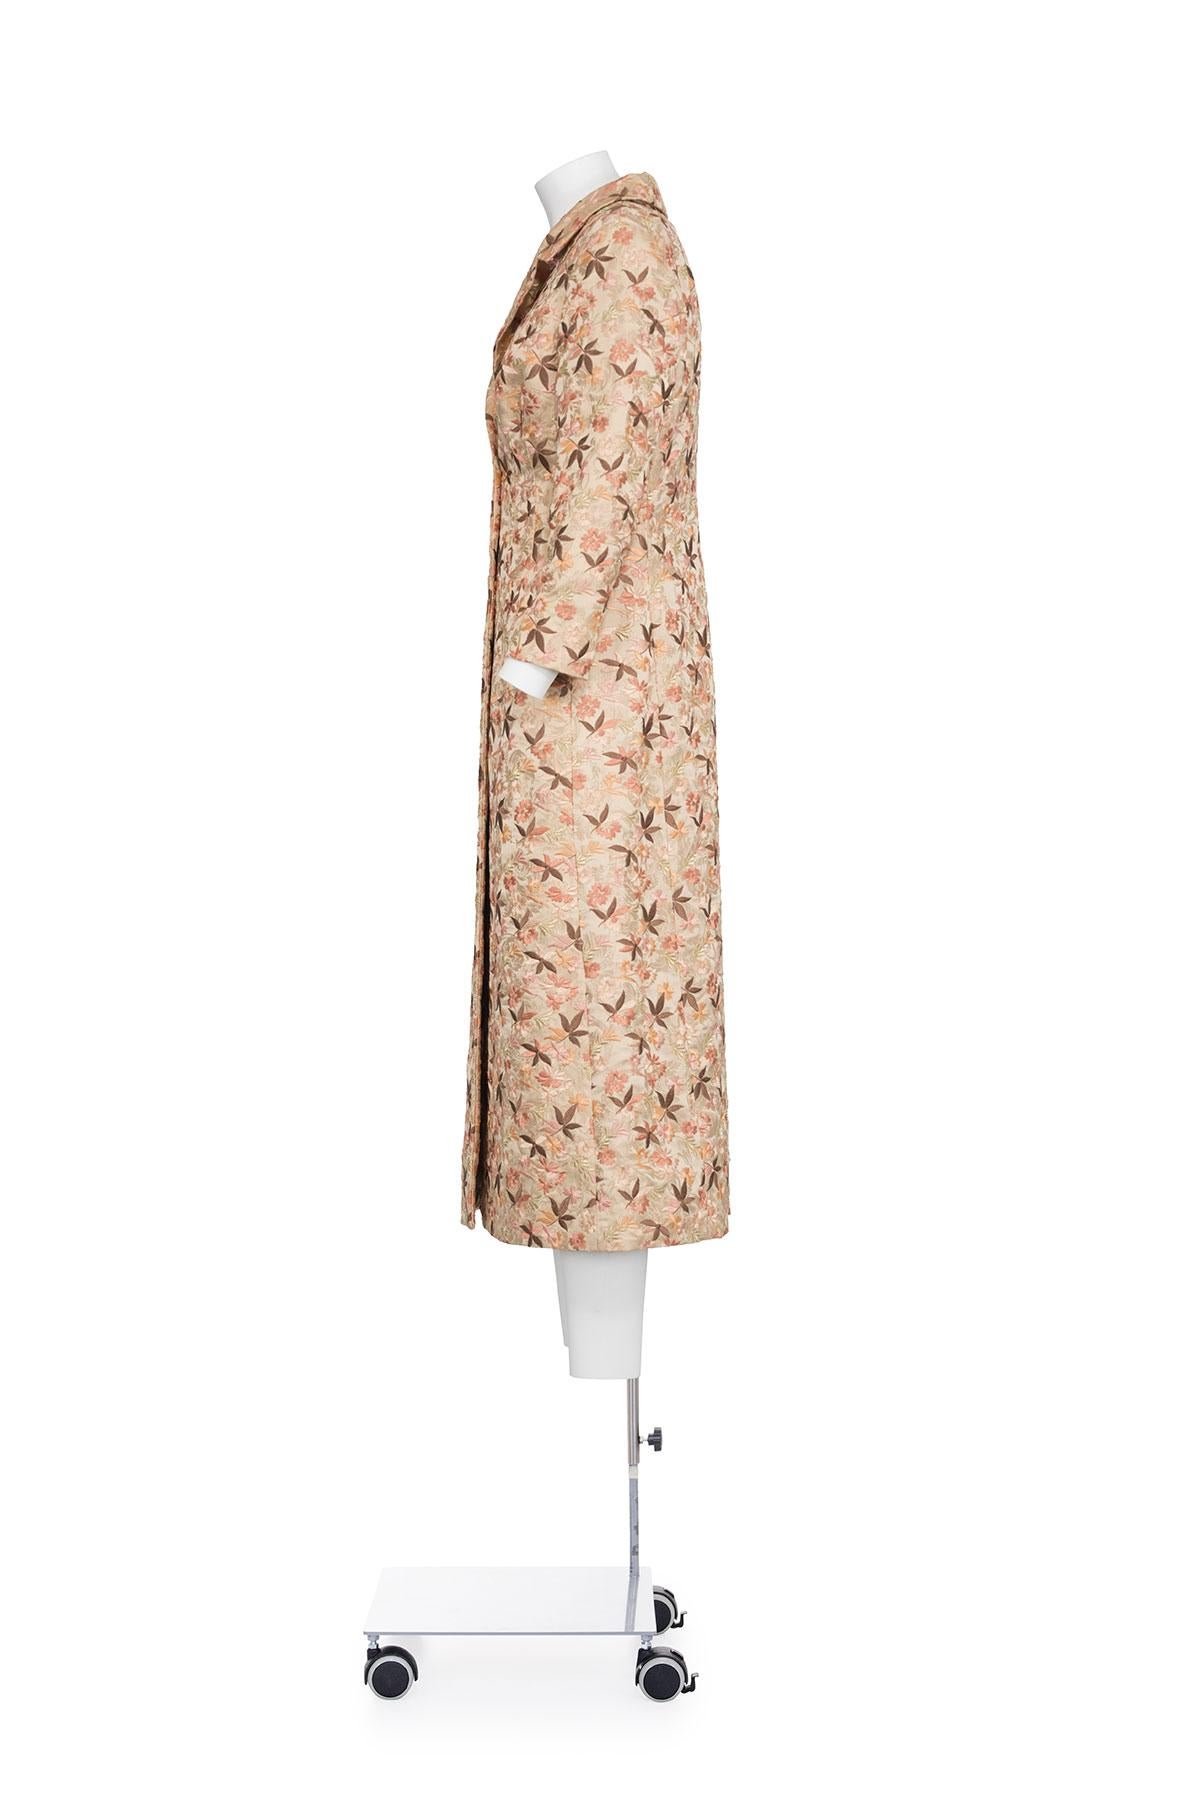 Spring Summer 1997 rare floral embroidered lightweight coat by Dolce & Gabbana.
Two buttons closure.
Fully lined in animalier fabric.
The composition is 46% polyester, 30% viscose, 22% silk and 2% cotton.

